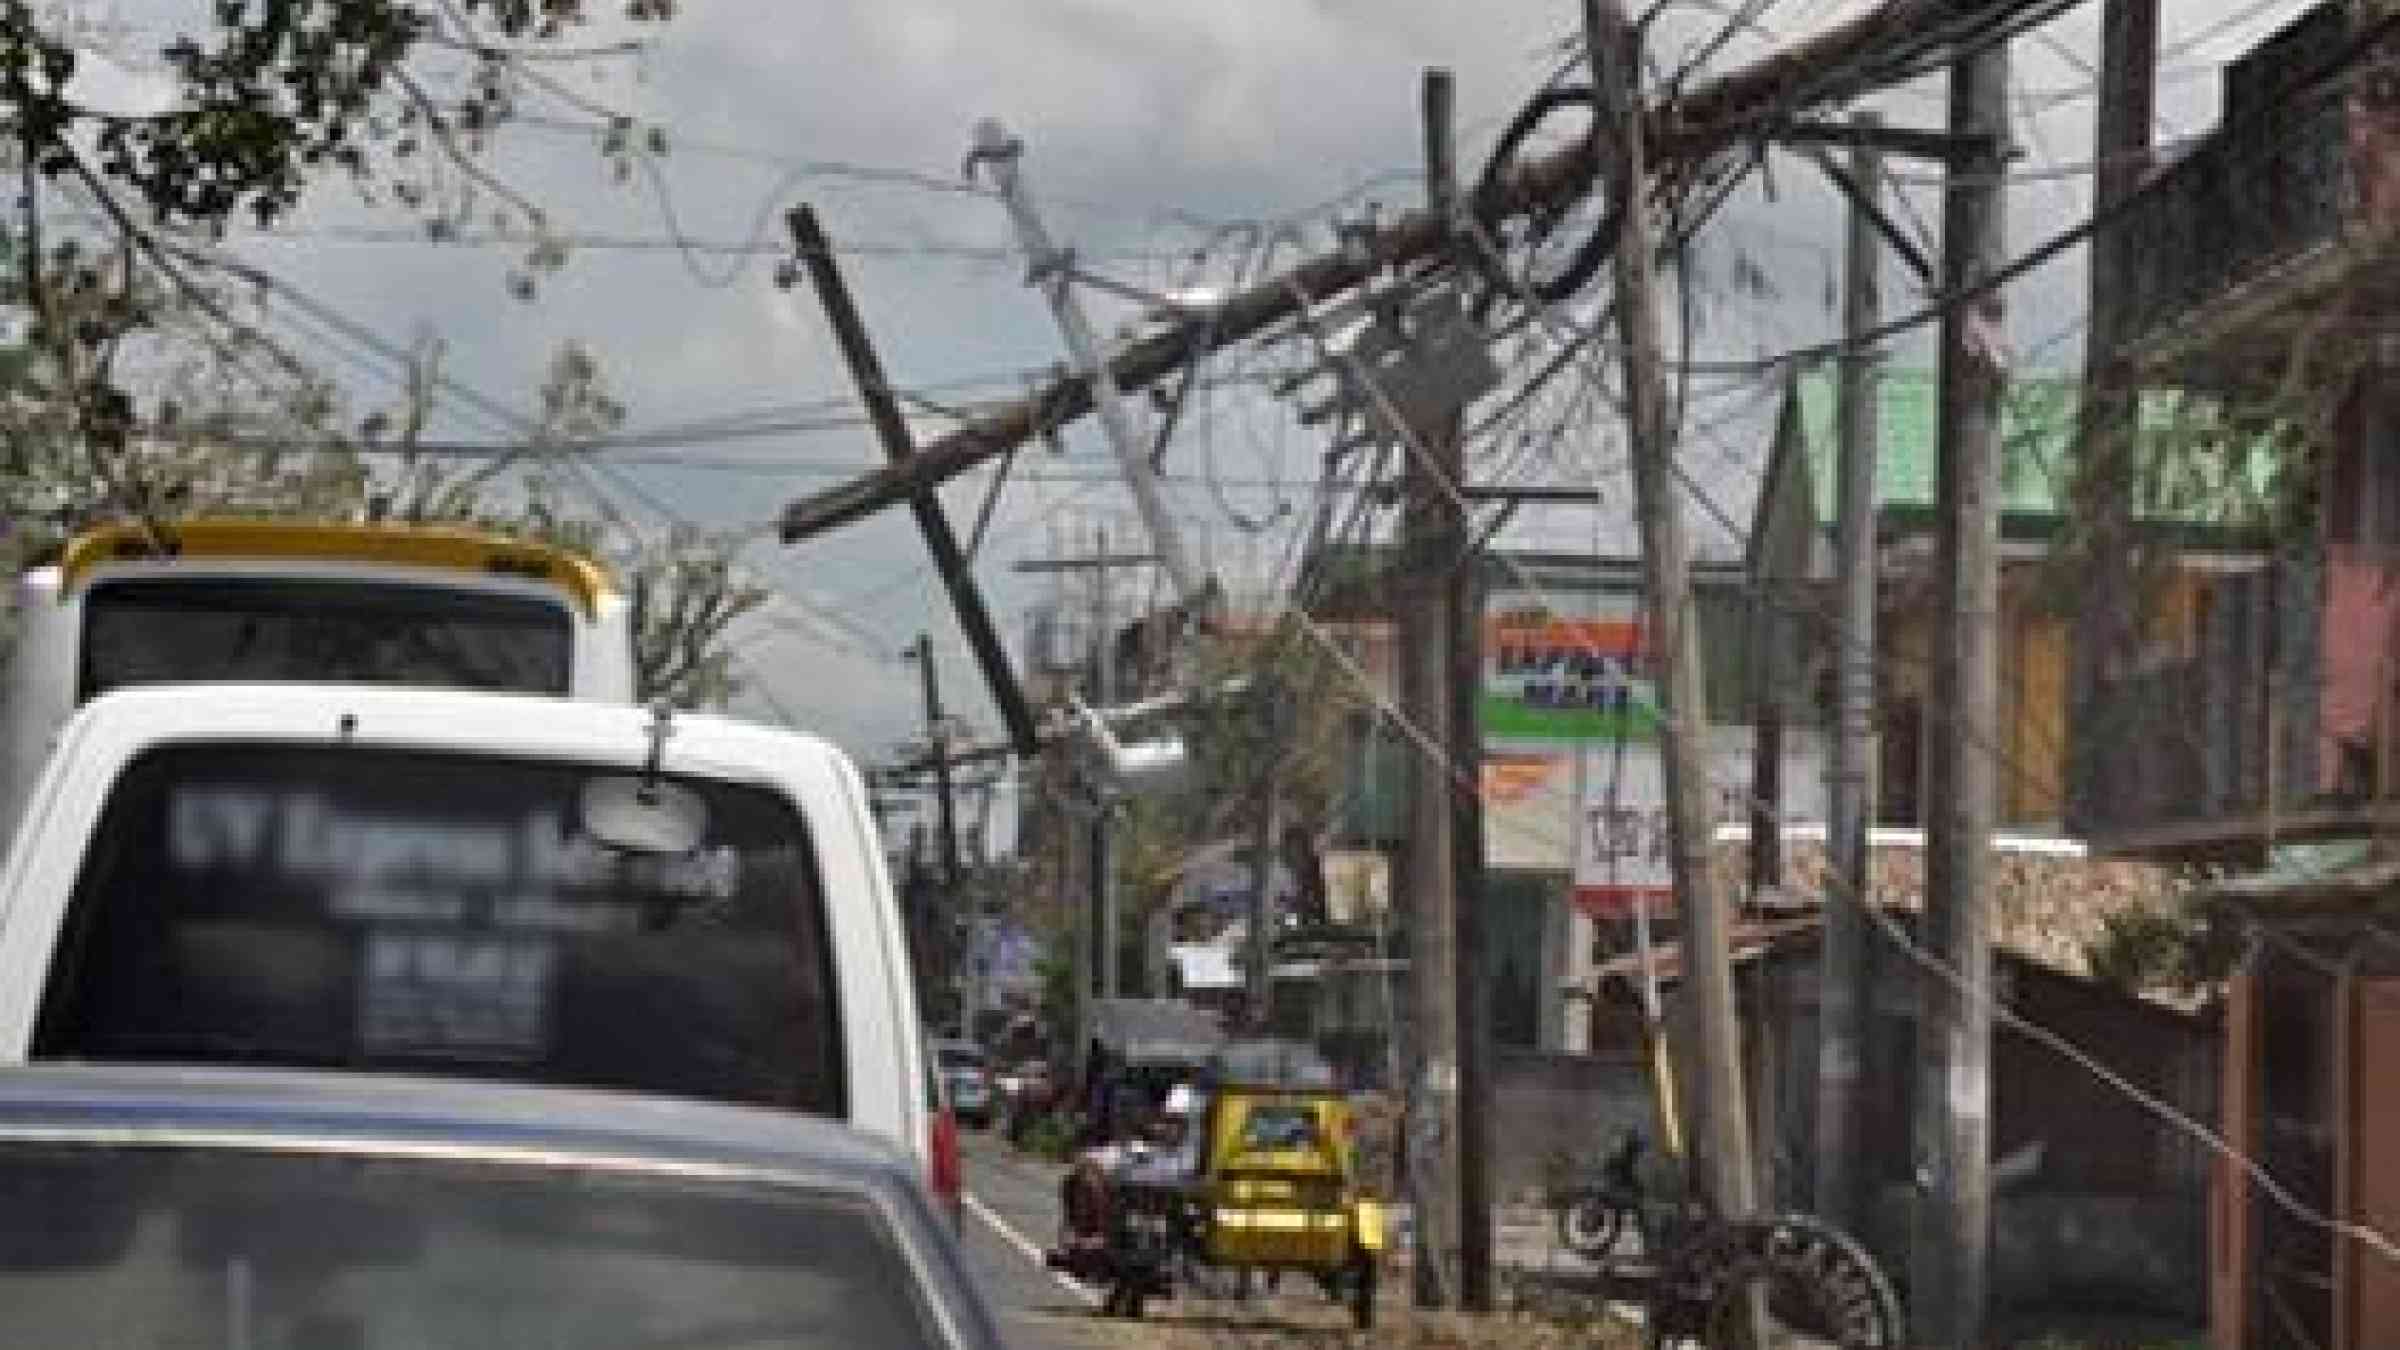 Power supply was crippled in many areas of the Philippines affected by Typhoon Glenda.